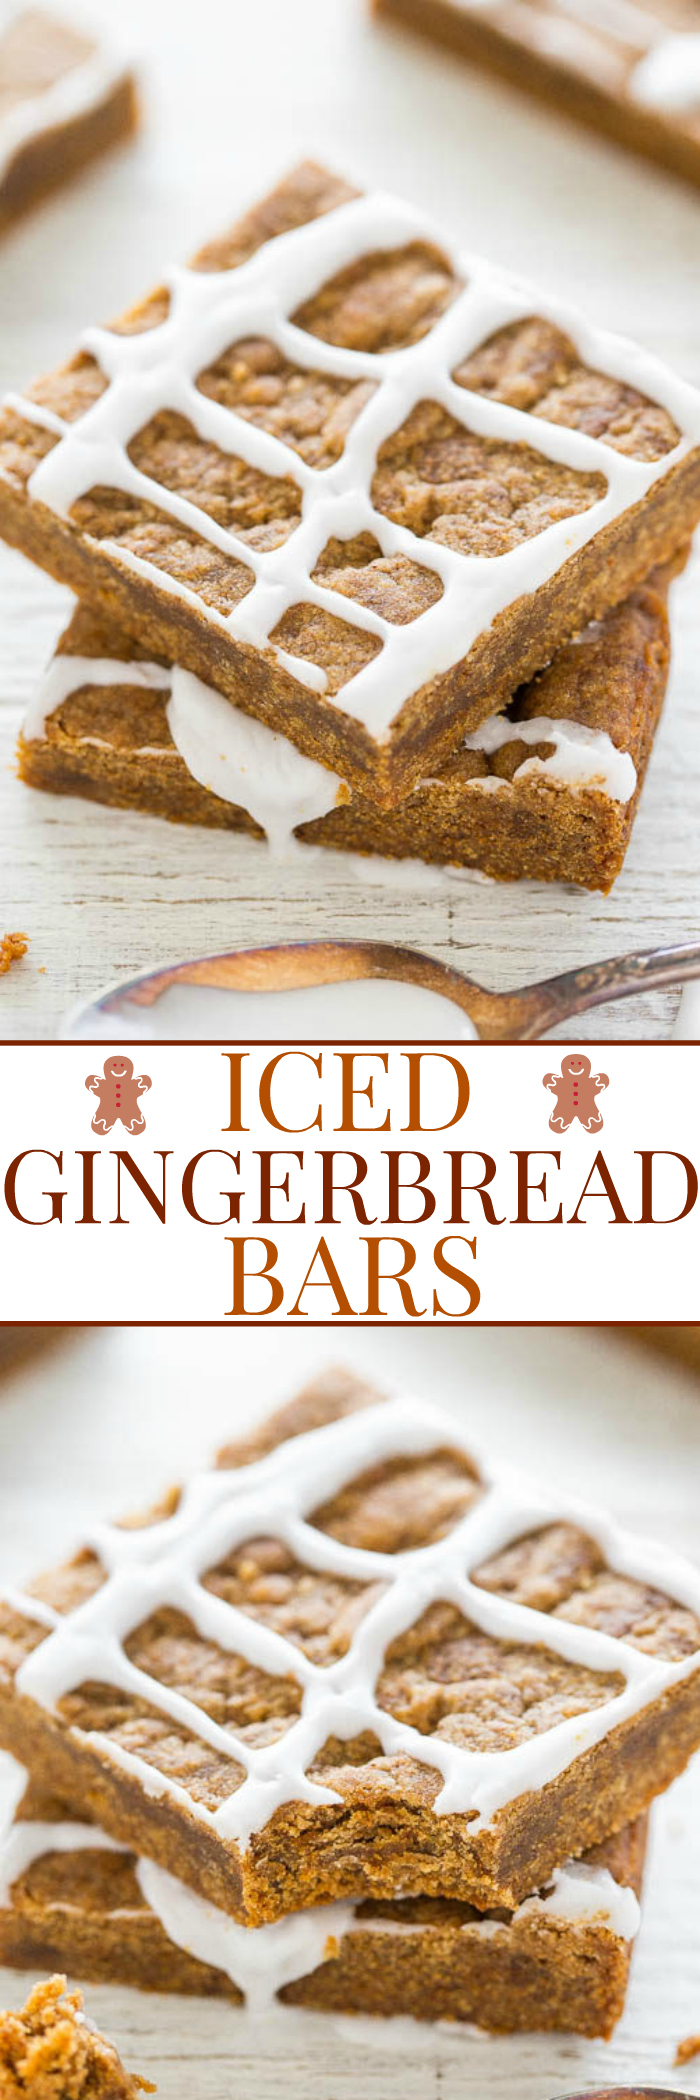 Iced Gingerbread Bars - Soft, chewy bars that are full of rich gingery molasses flavor!! Wayyyy faster and easier than rolling out gingerbread cookies! No mixer, no fuss, and the sweet icing seals the deal!!